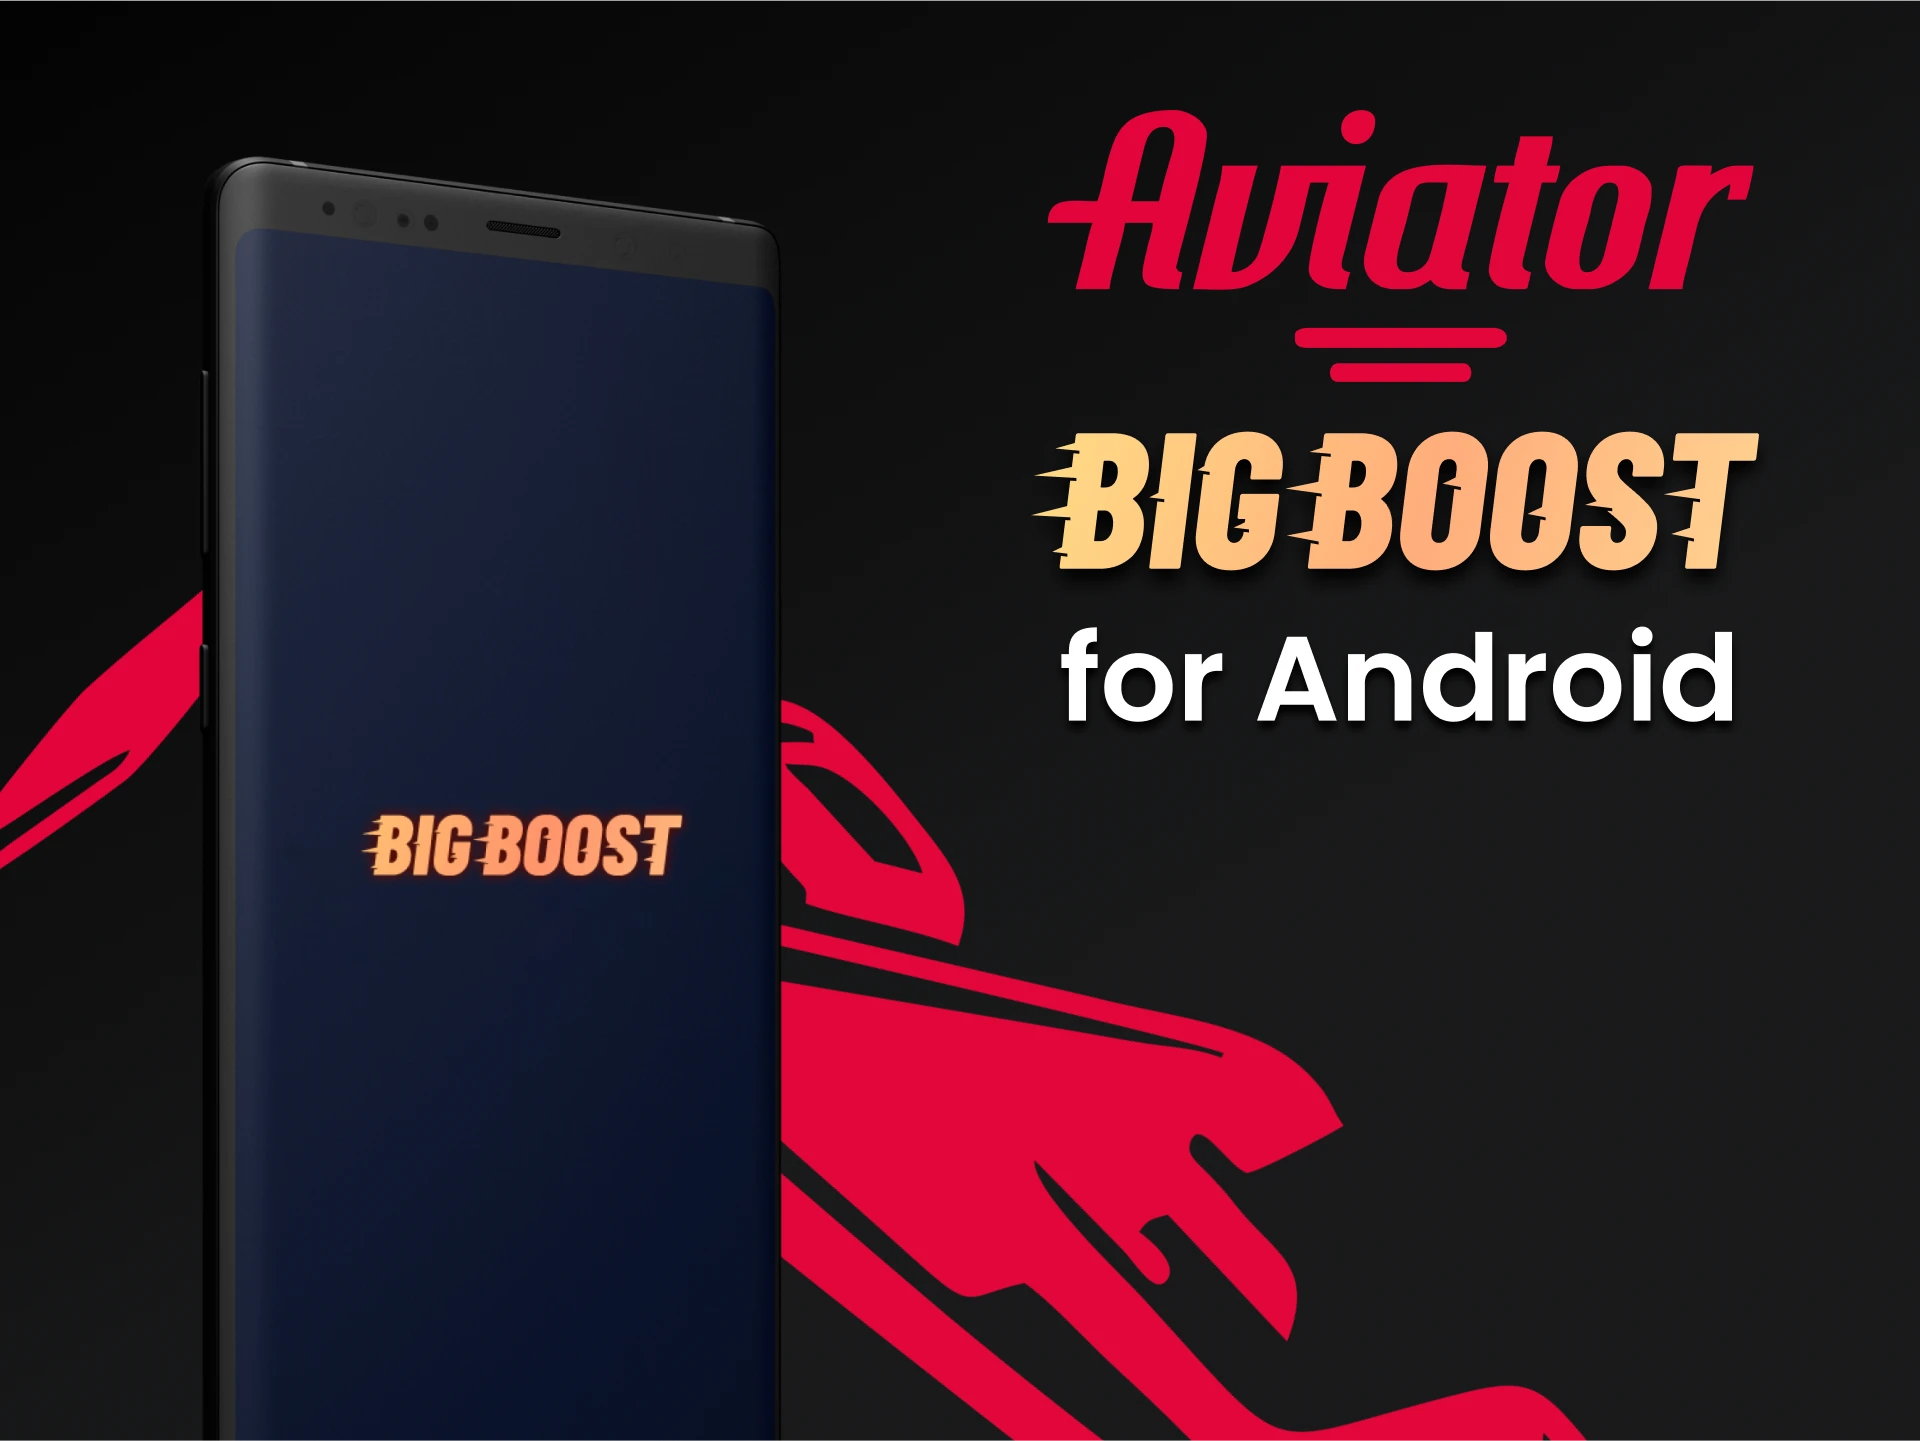 Play the Big Boost app for smartphones in Aviator.